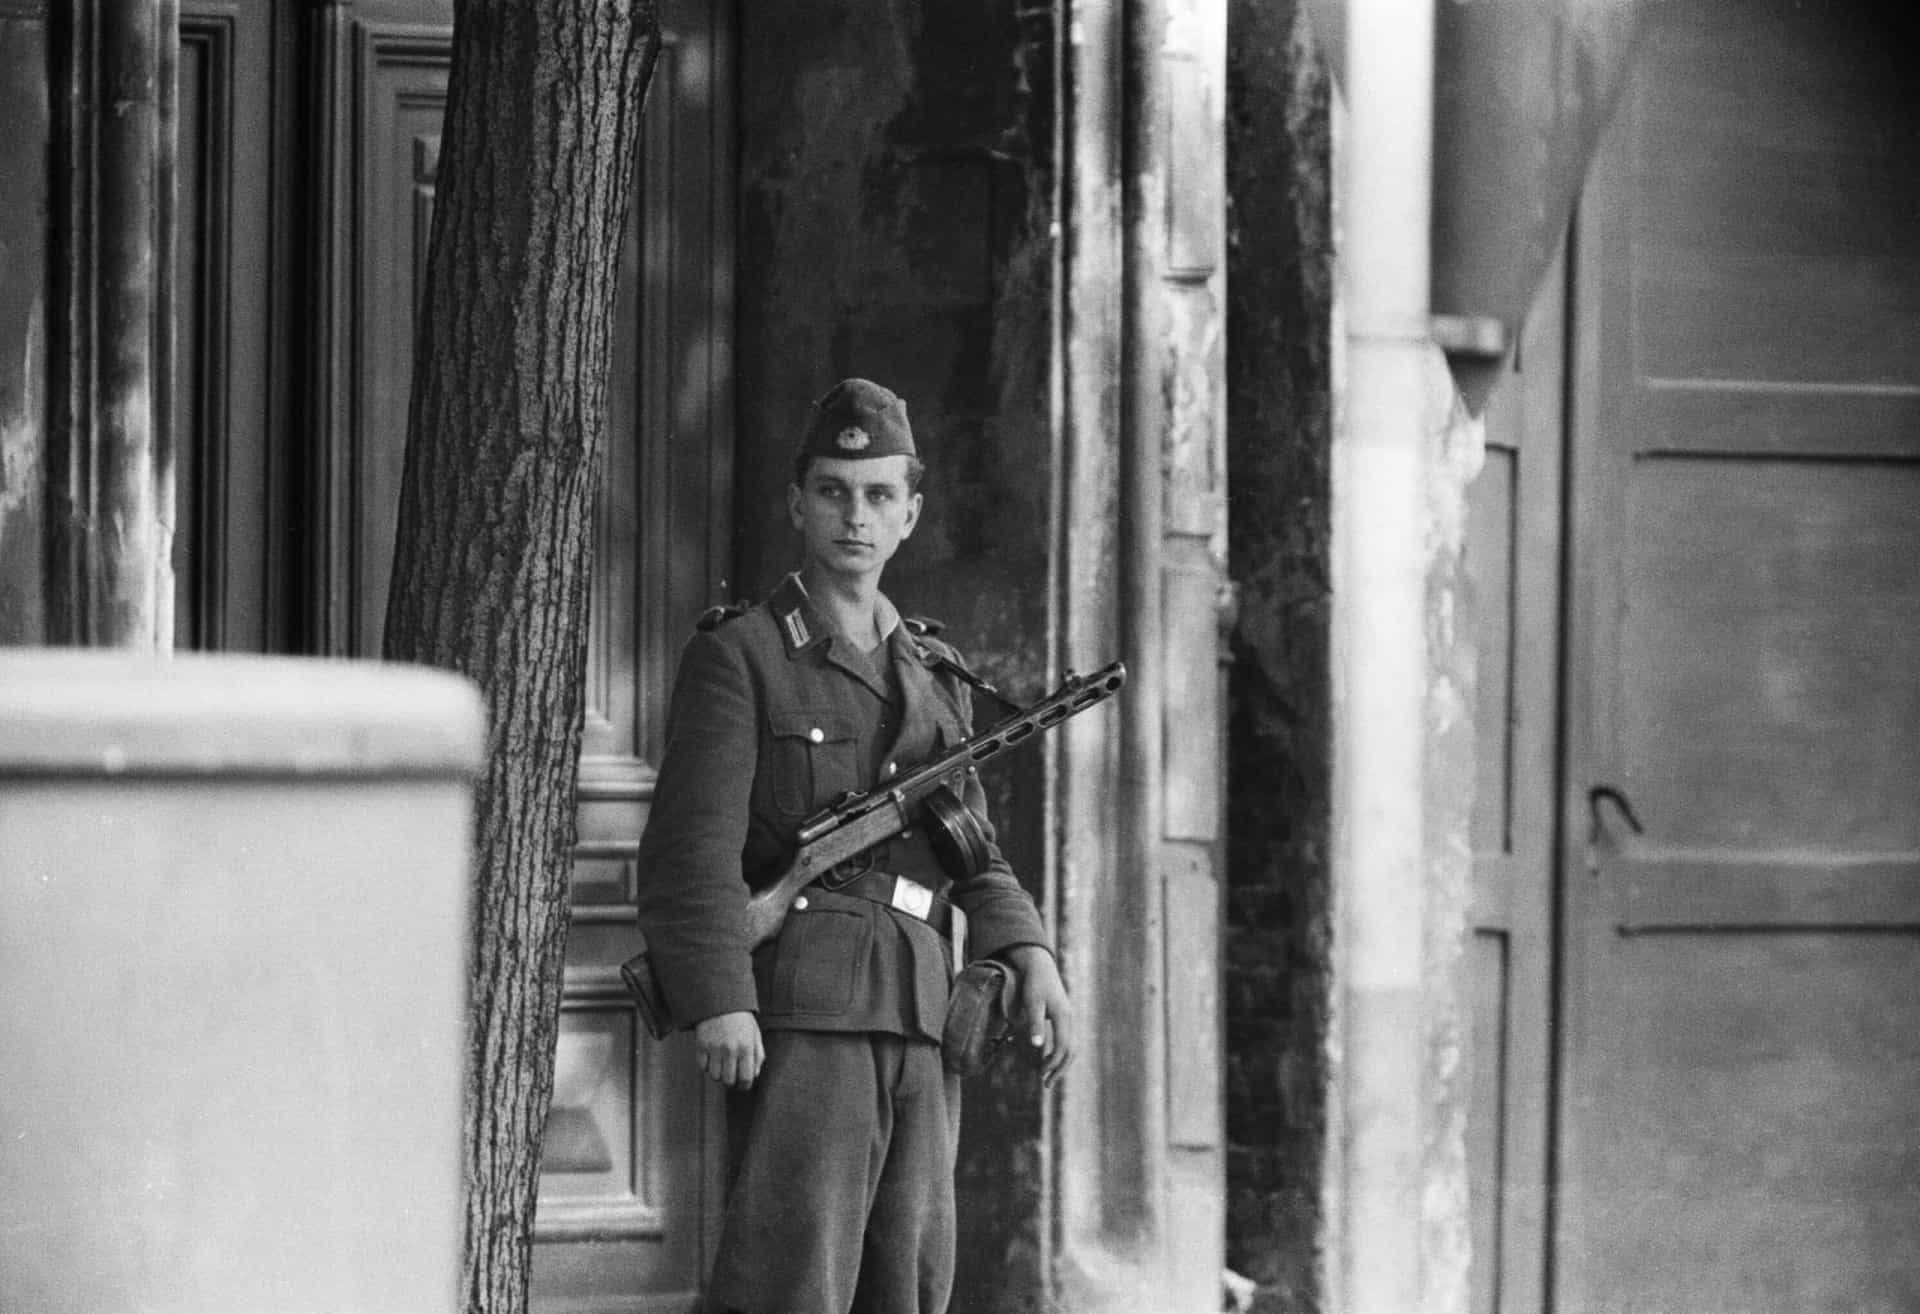 <p>Pictured: a young East German border guard keeps watch on the streets of Berlin after all East-West border points were closed.</p><p>You may also like: <a href="https://www.starsinsider.com/n/363610?utm_source=msn.com&utm_medium=display&utm_campaign=referral_description&utm_content=509600en-us">Creepy and fascinating ghost towns you can actually visit</a></p>